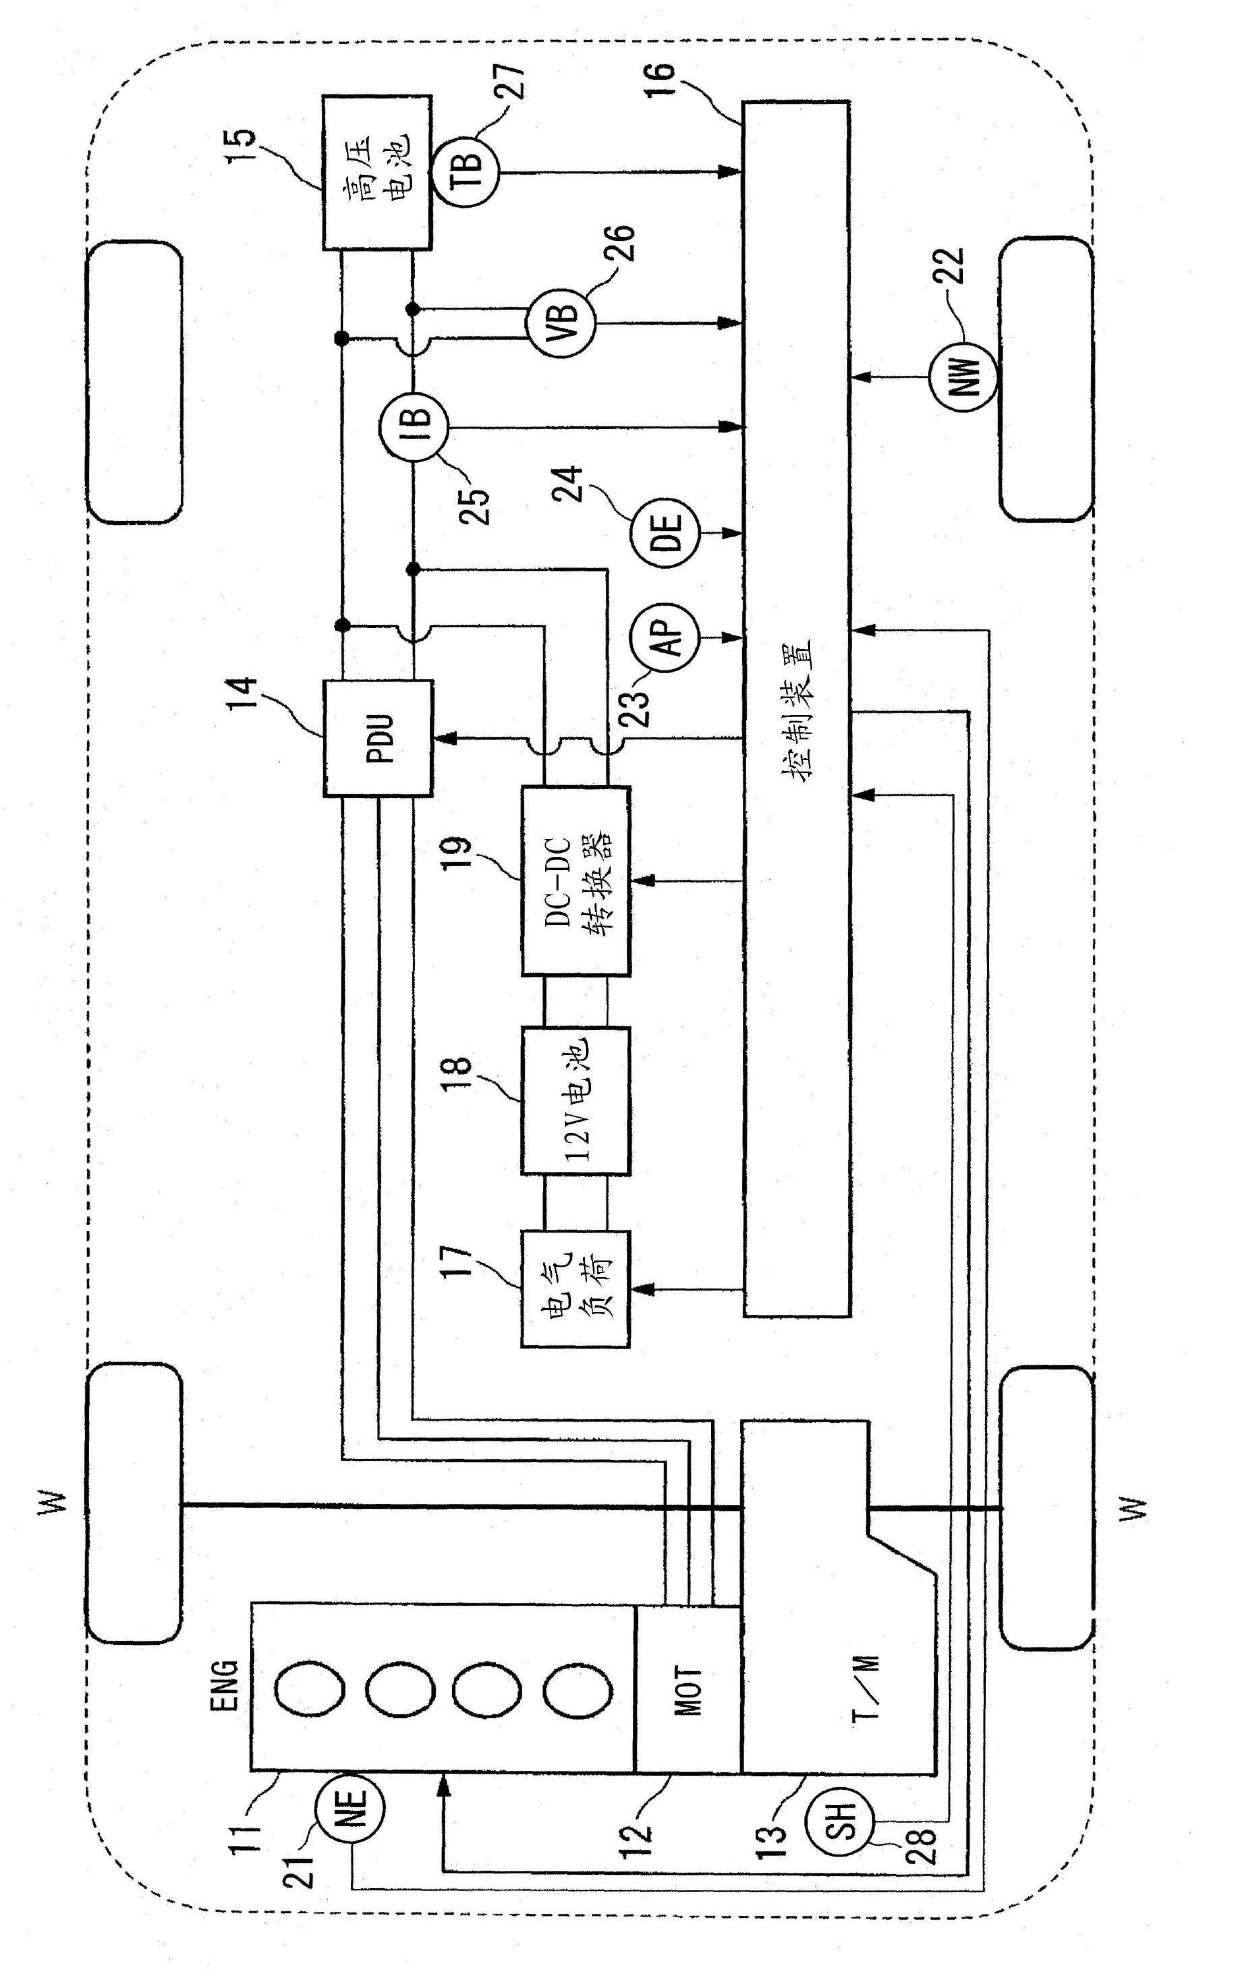 Control apparatus for hybrid vehicle